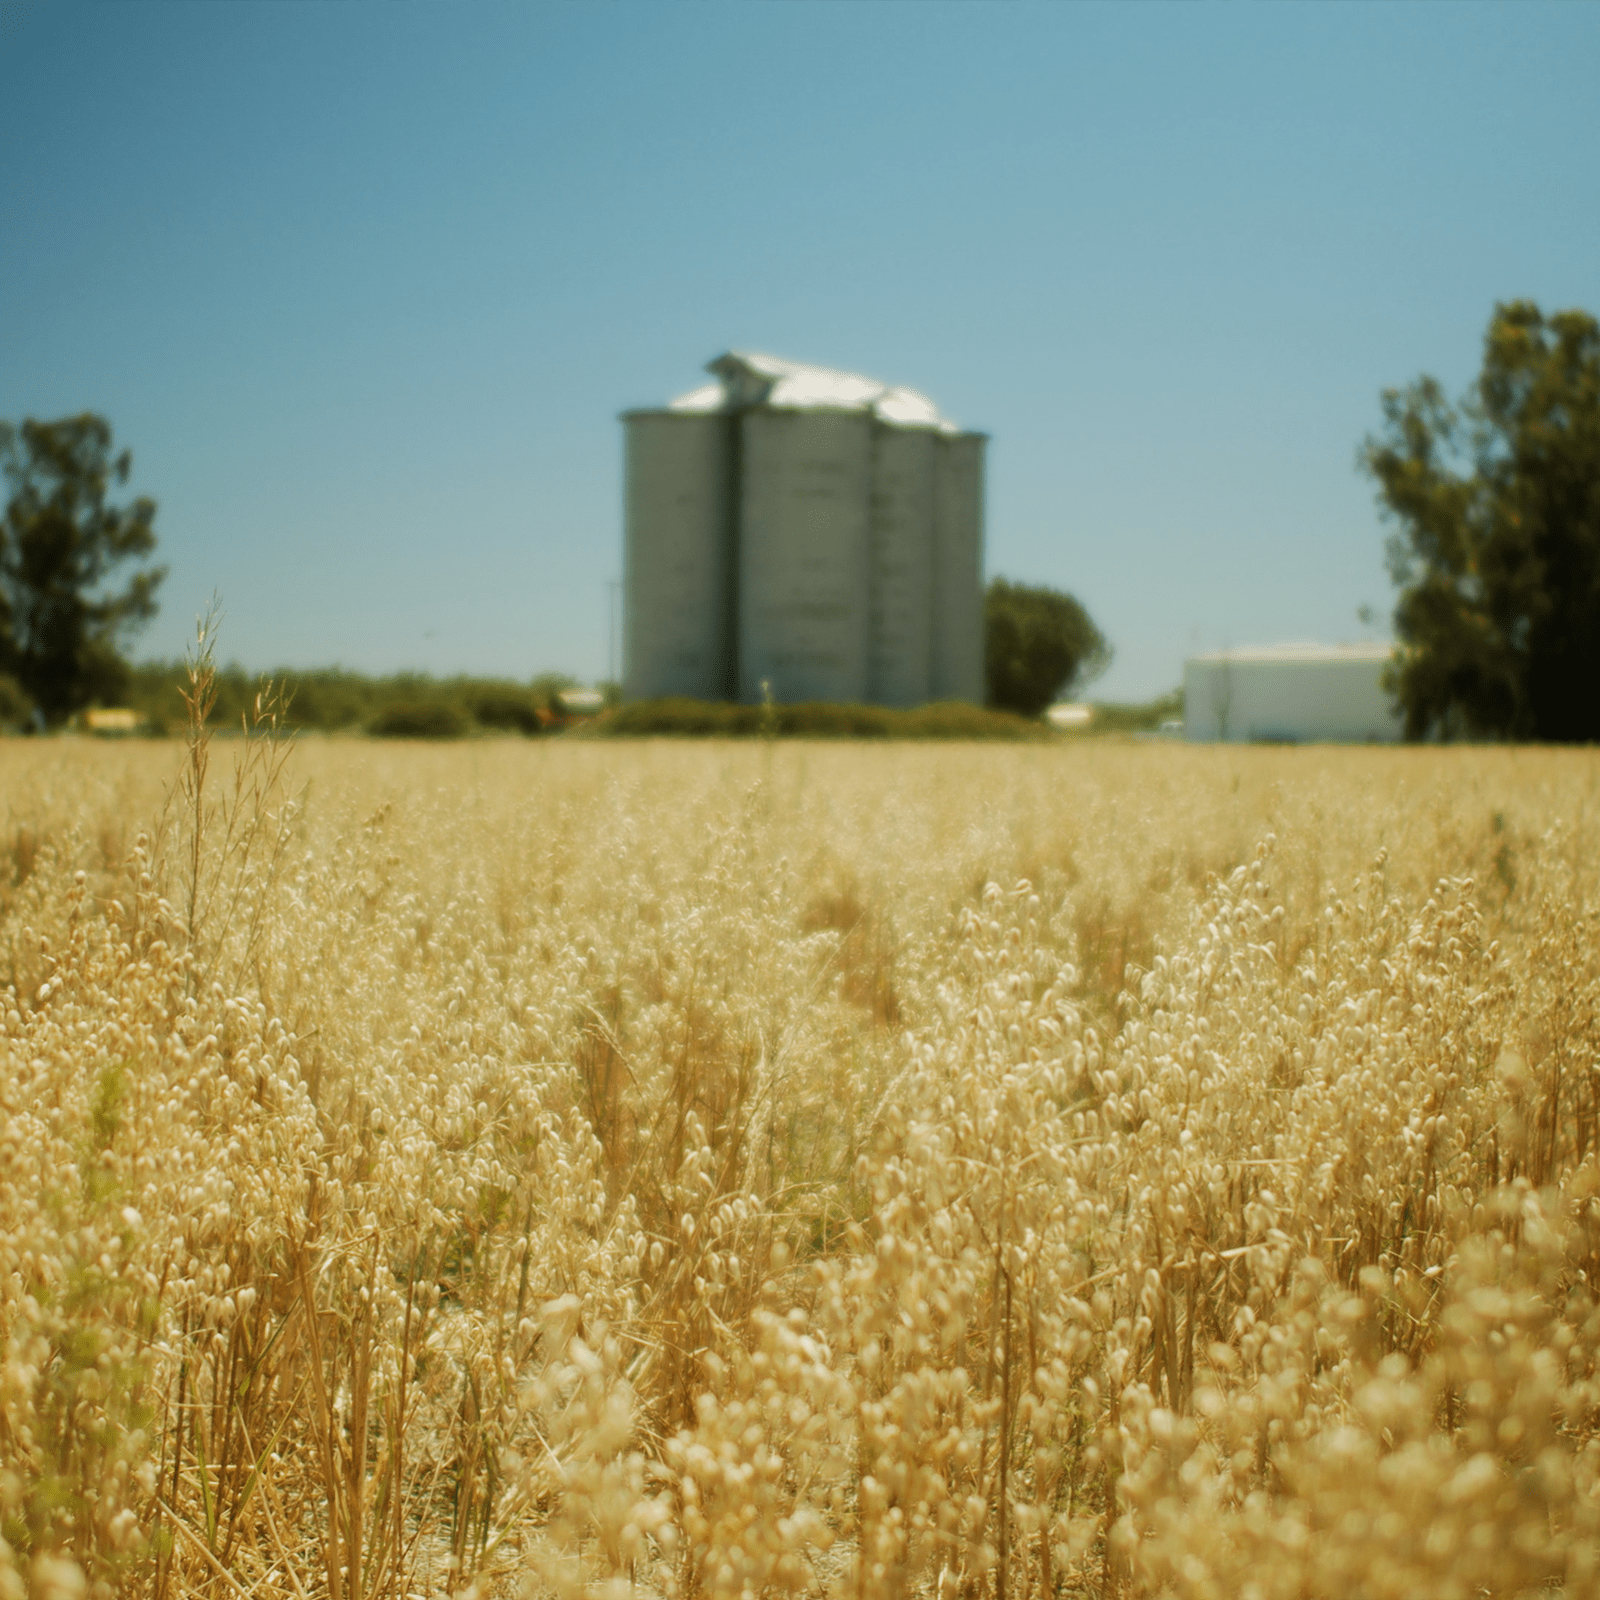 A field of grains with two silos in the background